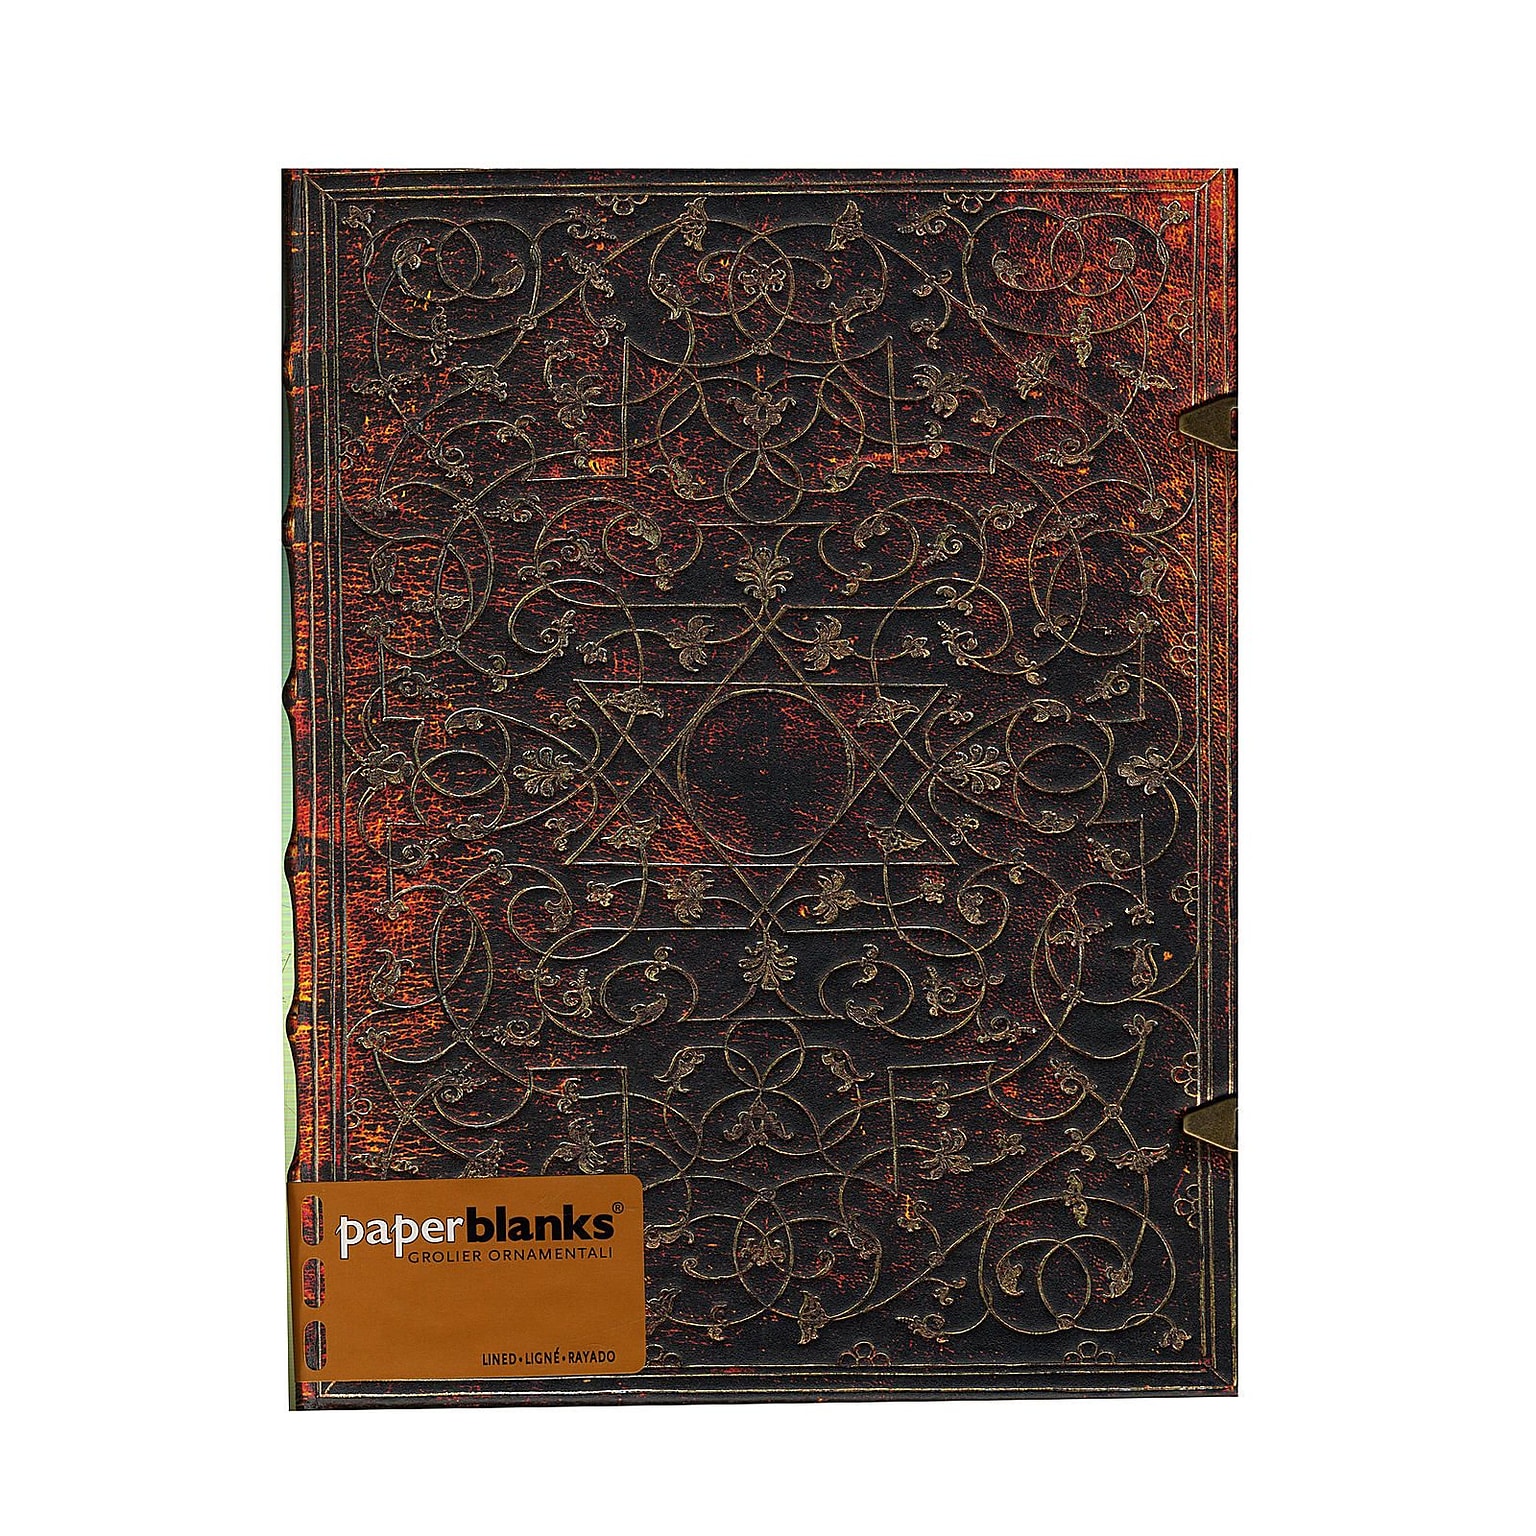 Paperblanks Grolier Ornamentali Journals Ultra 7 In. X 9 In. 144 Pages, Lined (9781439715956)